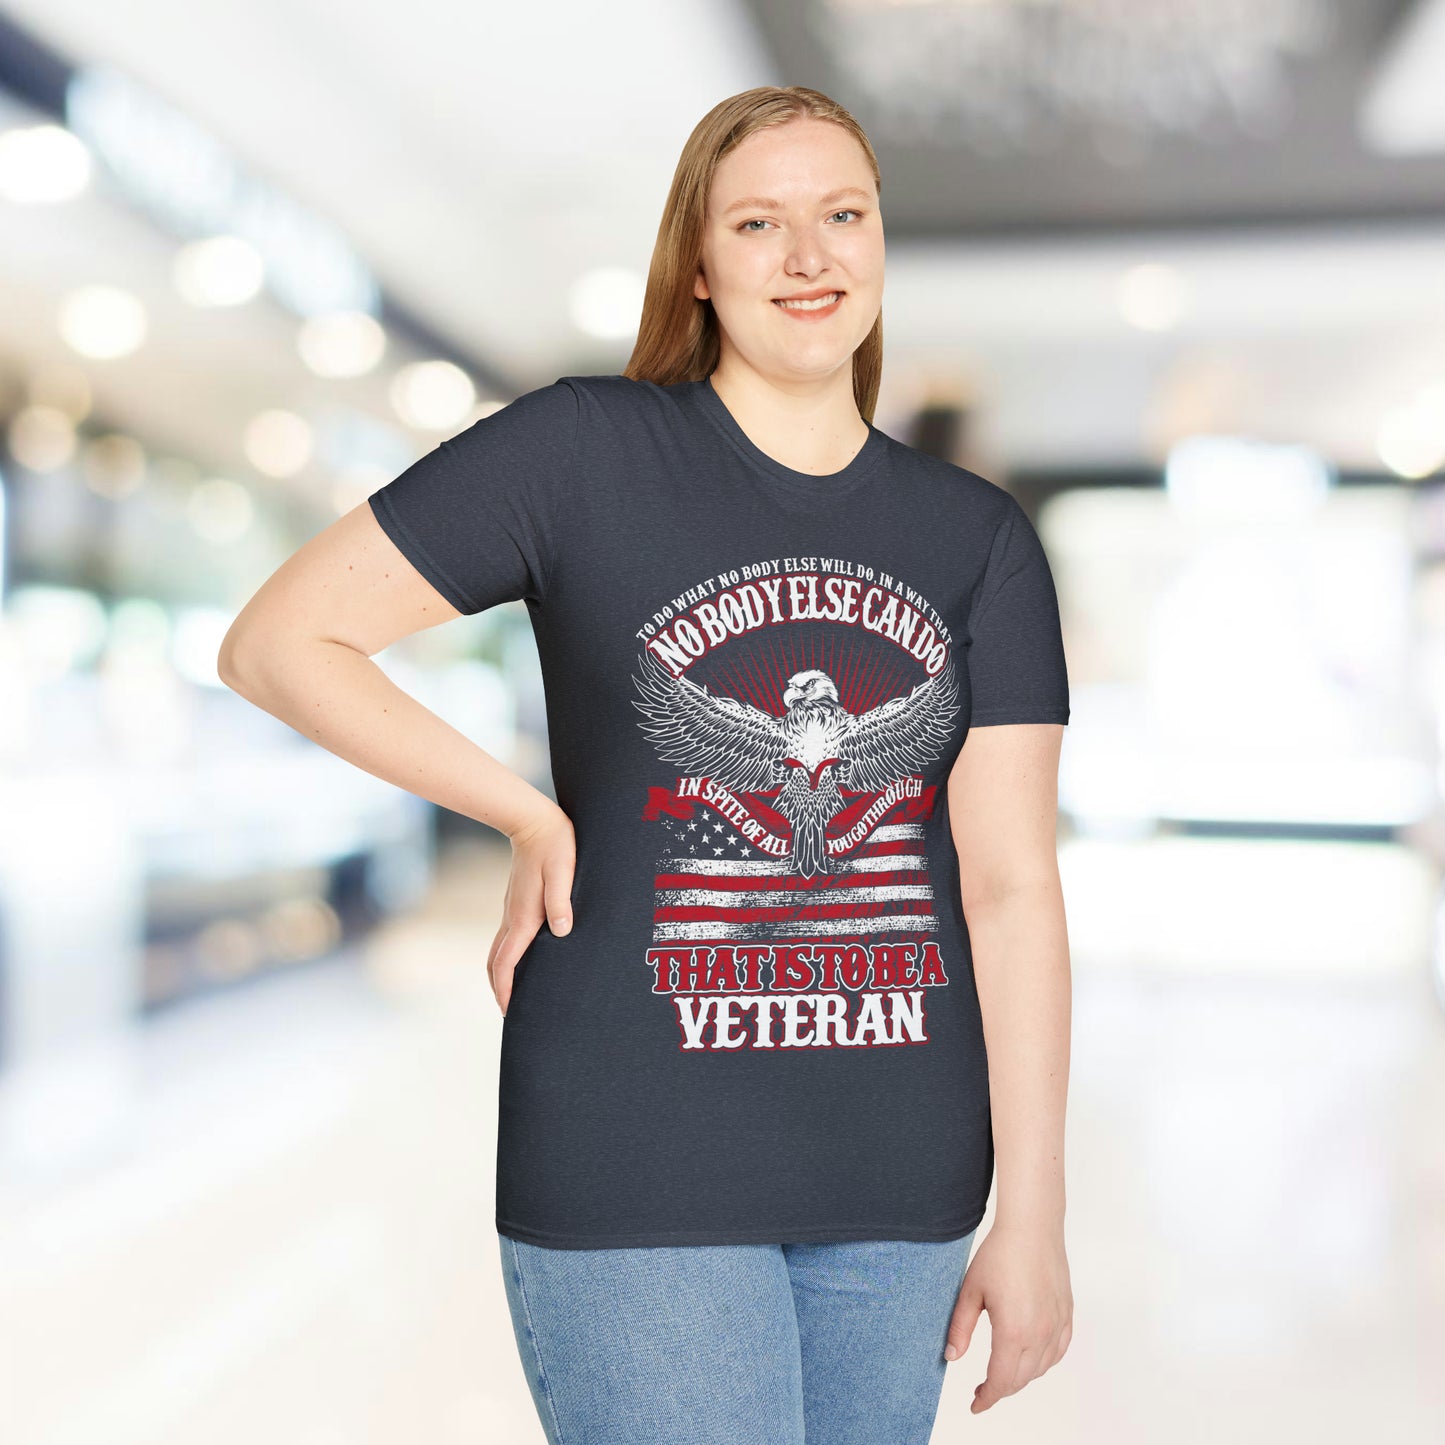 That Is To Be A Veteran - Unisex Softstyle T-Shirt